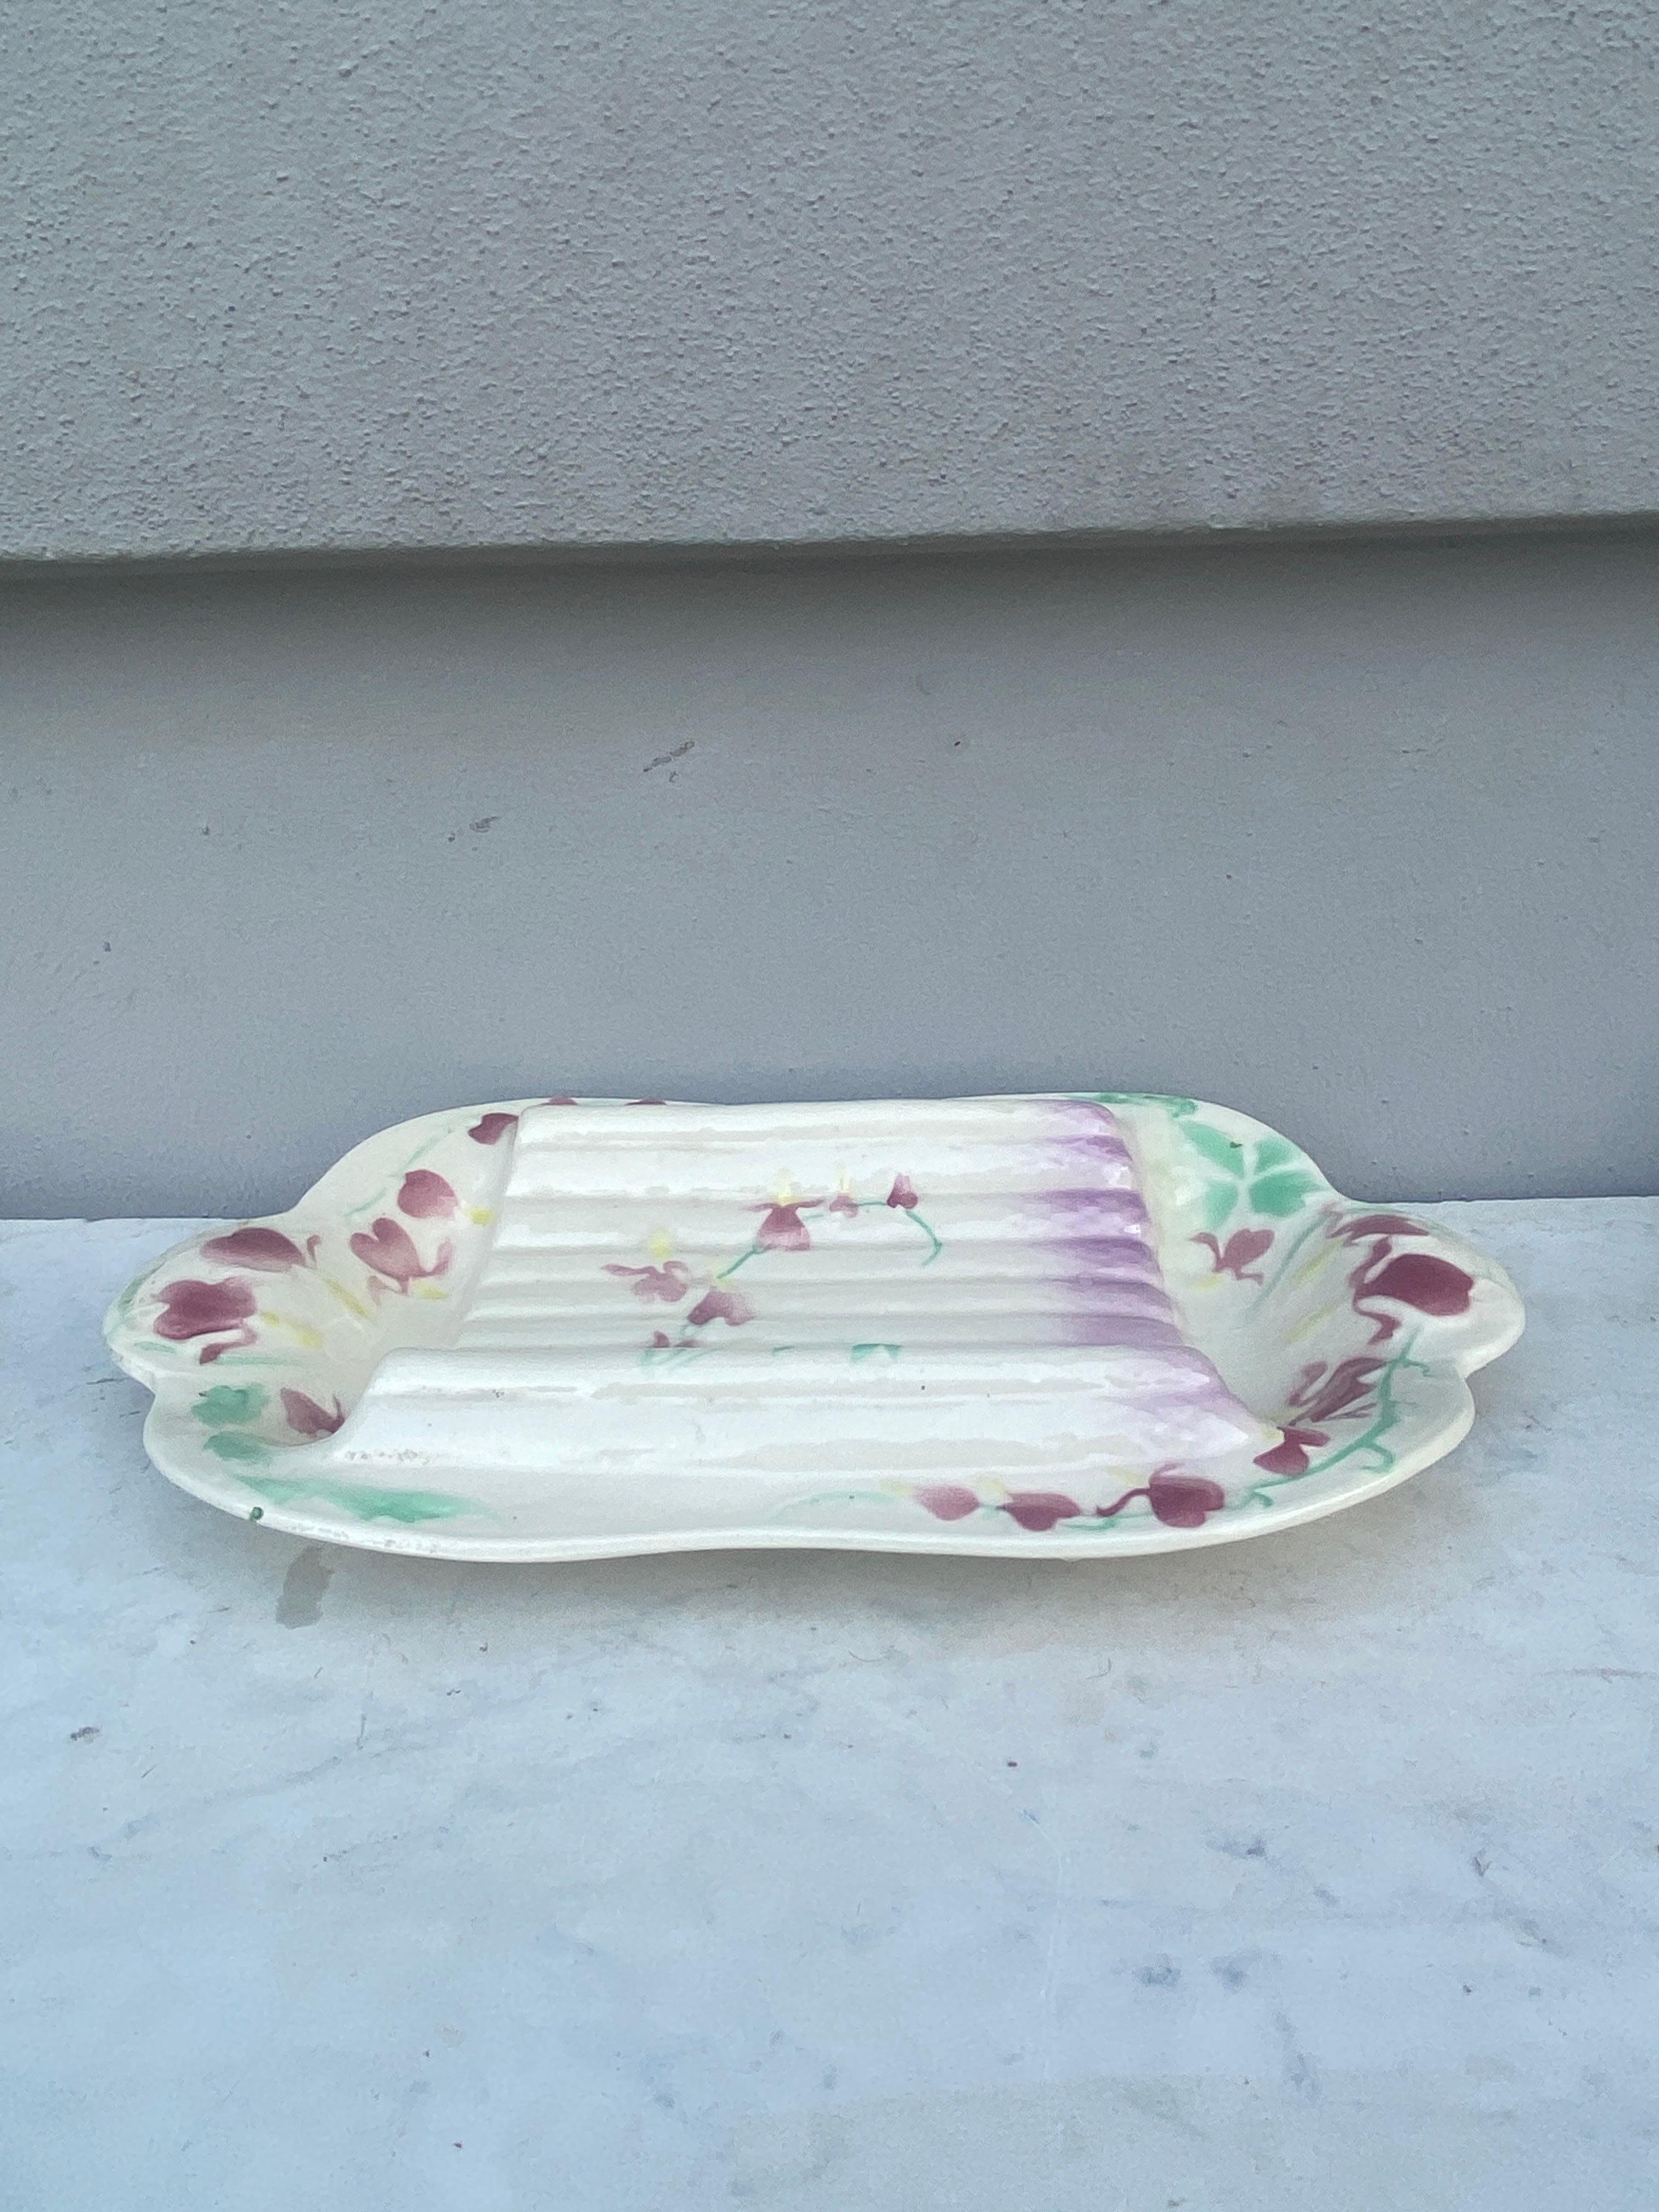 Majolica asparagus platter Saint Clement, circa 1930.
Decorated with pink flowers.